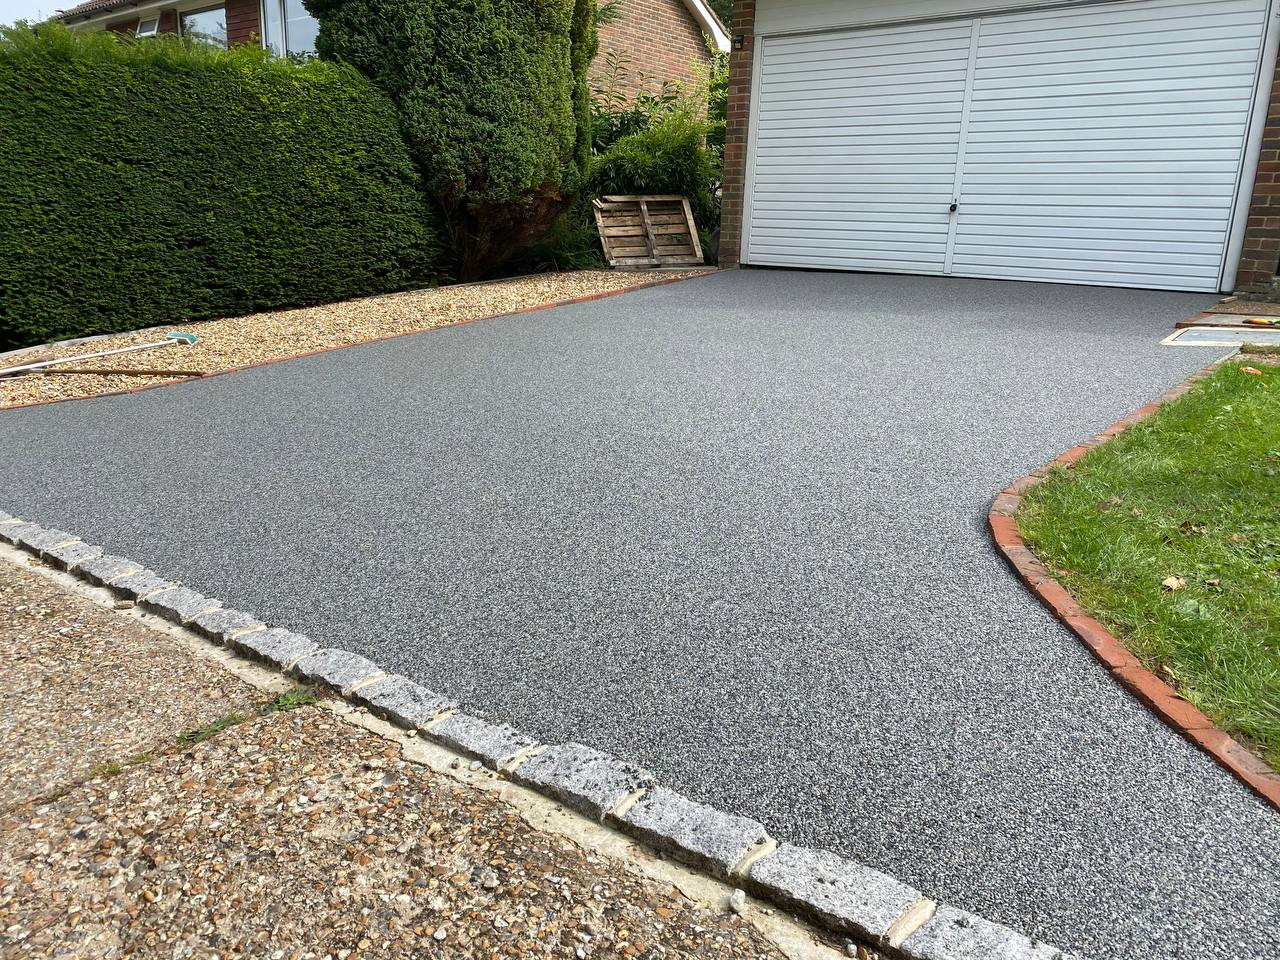 This is a photo of a new resin bound drive carried out in Southampton. All works done by Resin Driveways Southampton